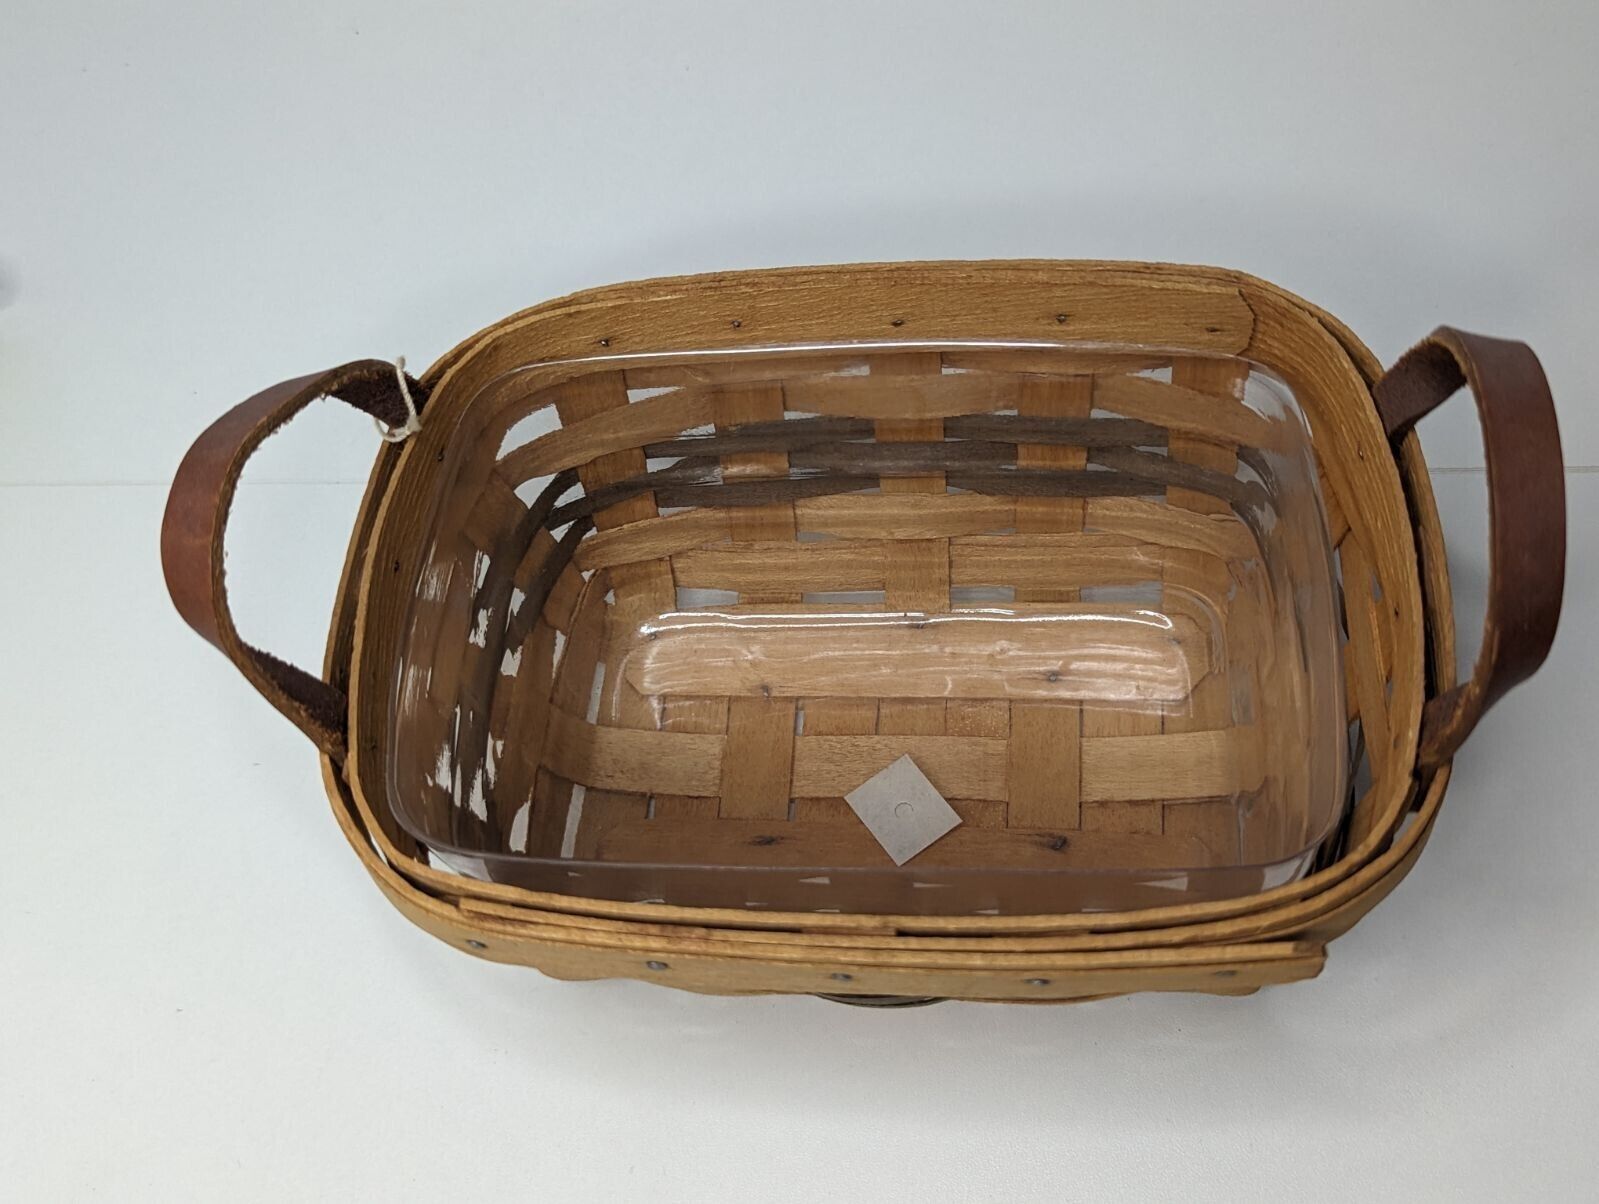 Vintage Handcrafted Wicker Basket From Staker Duncan Falls, Ohio 5x6